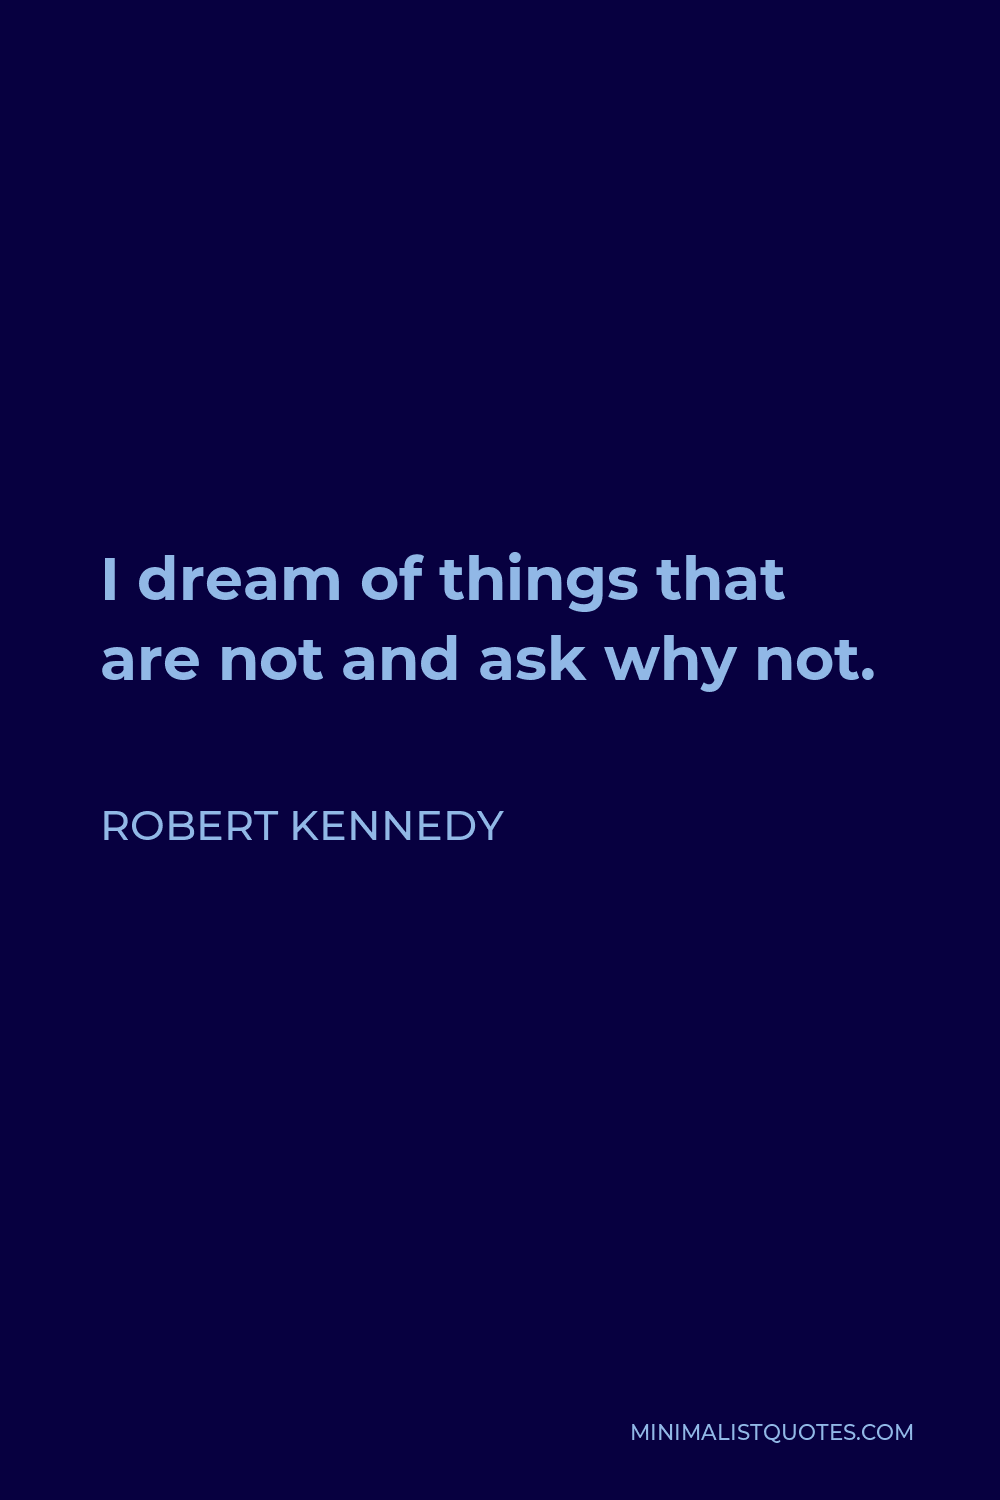 Robert Kennedy Quote - I dream of things that are not and ask why not.